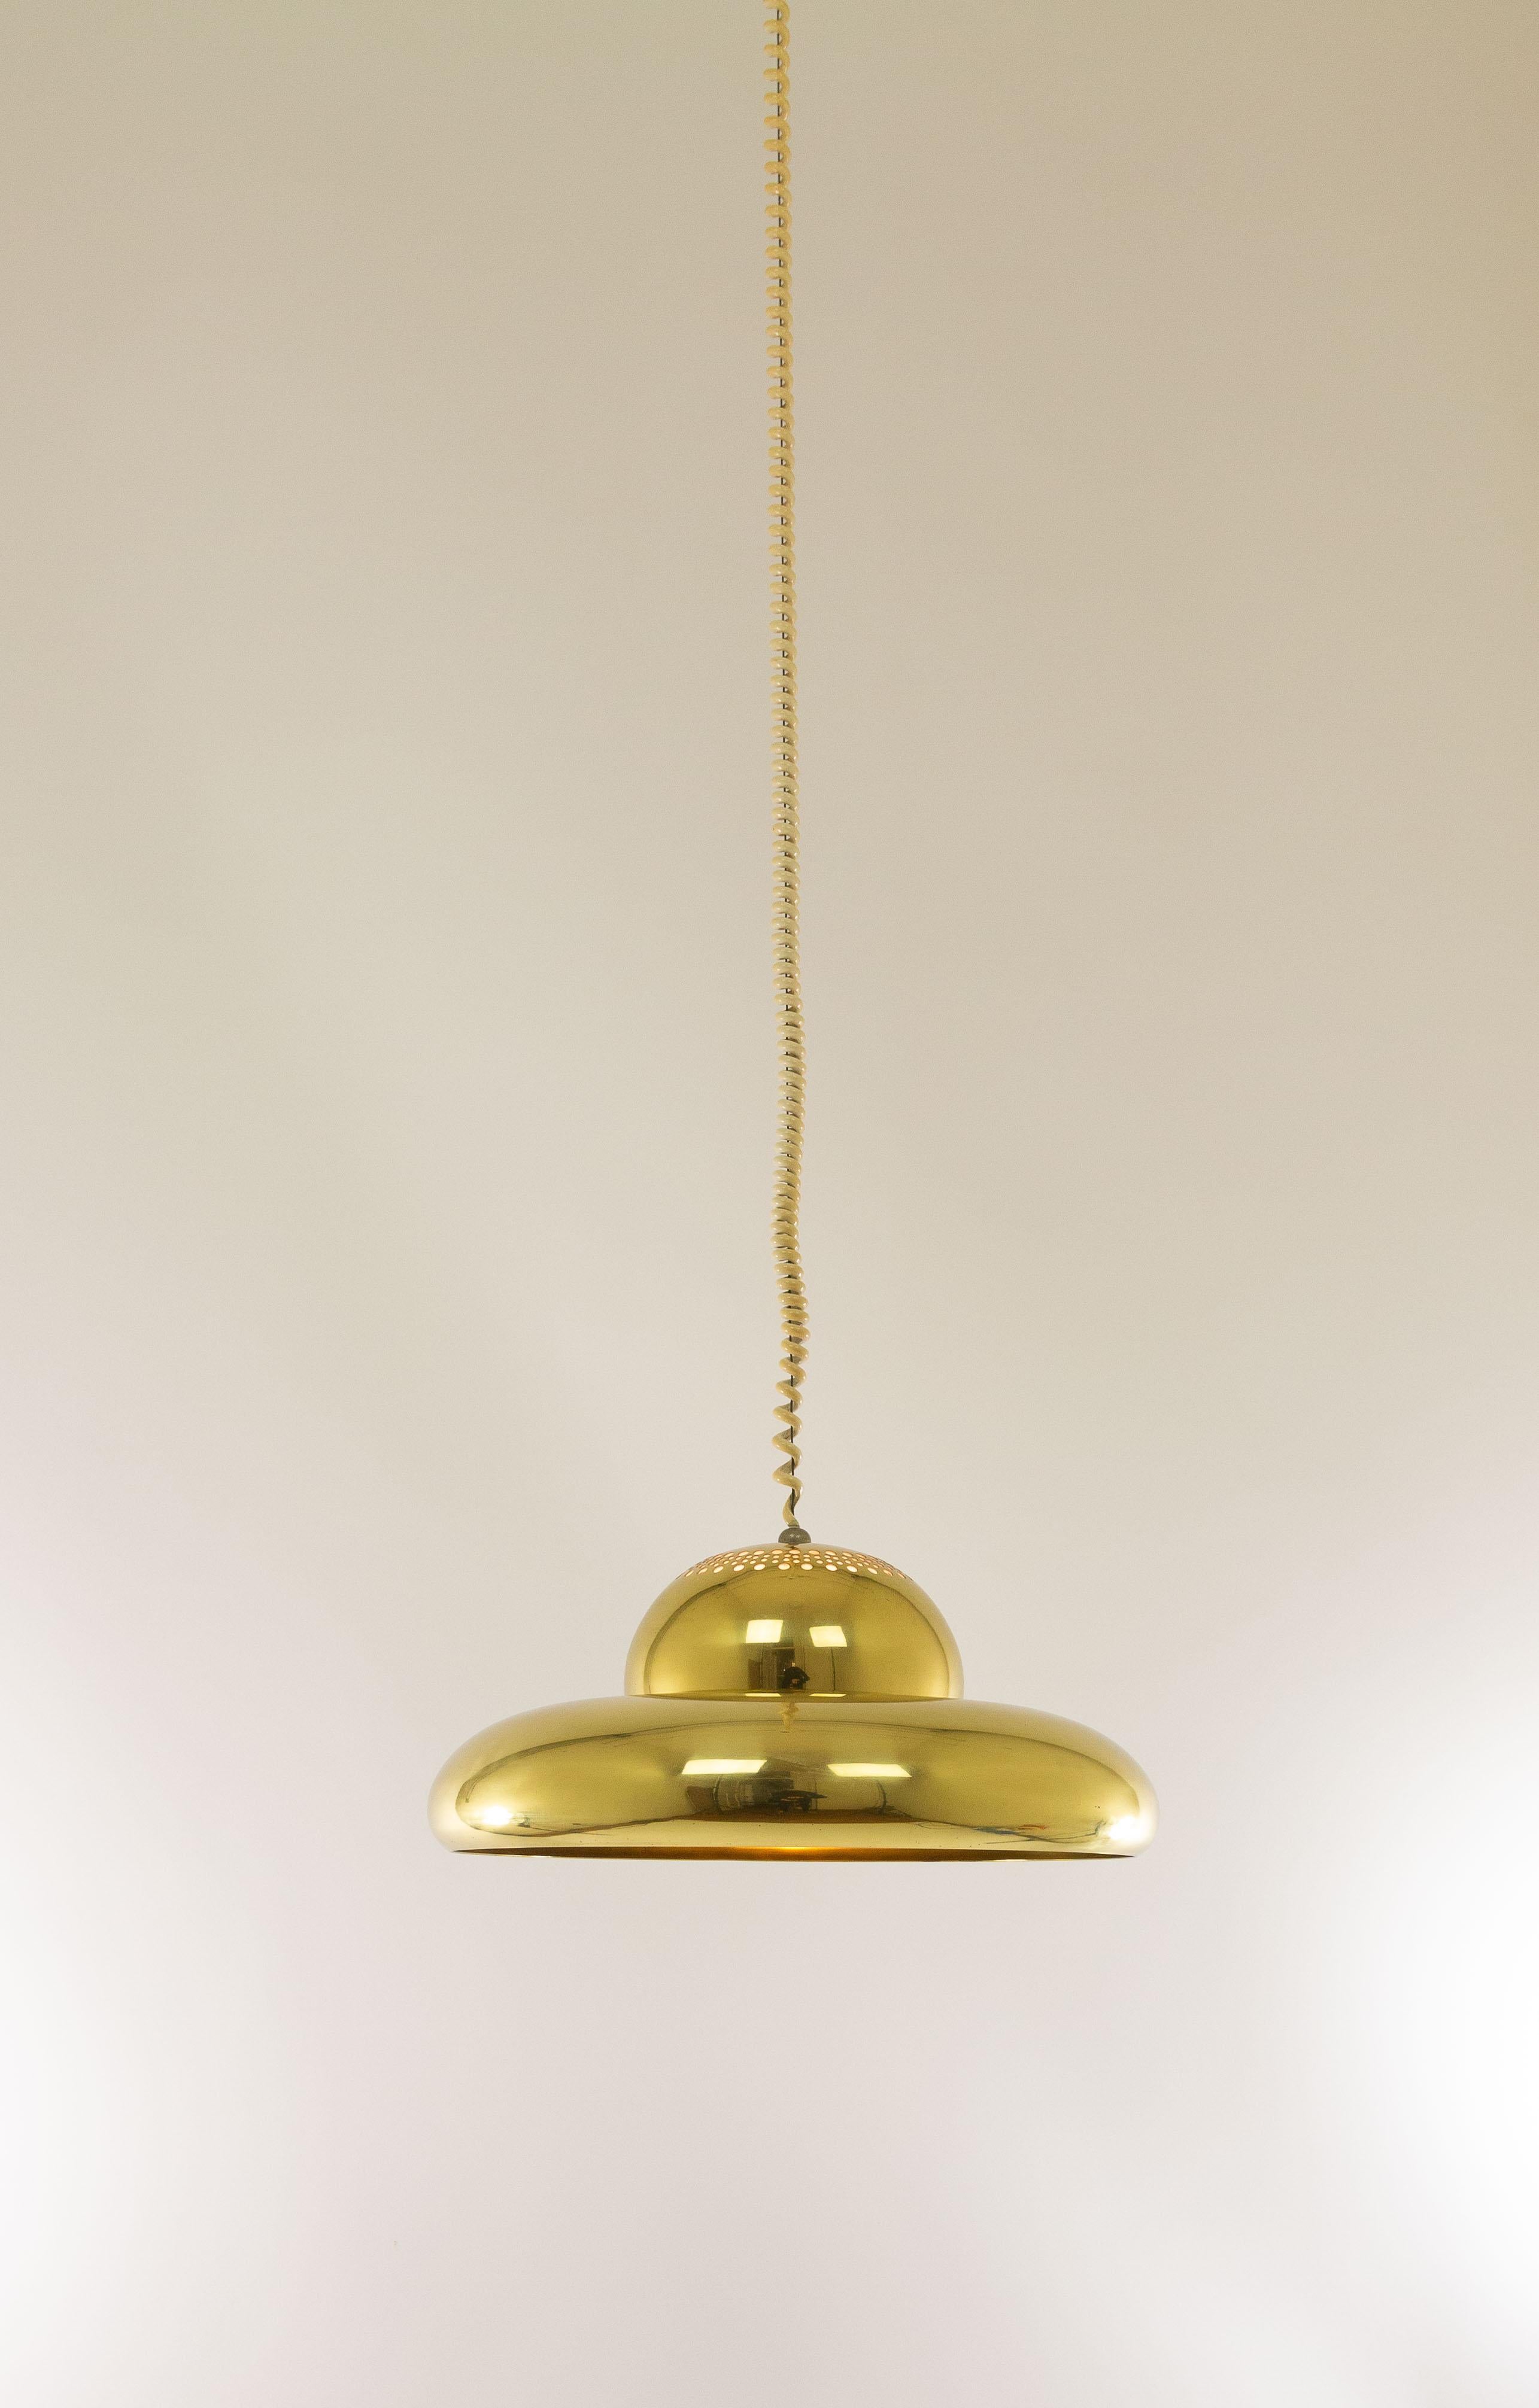 Fior di Loto pendant designed by Tobia and Afra Scarpa for Italian Lighting manufacturer Flos in 1963.

In a Flos catalogue we found this description: 